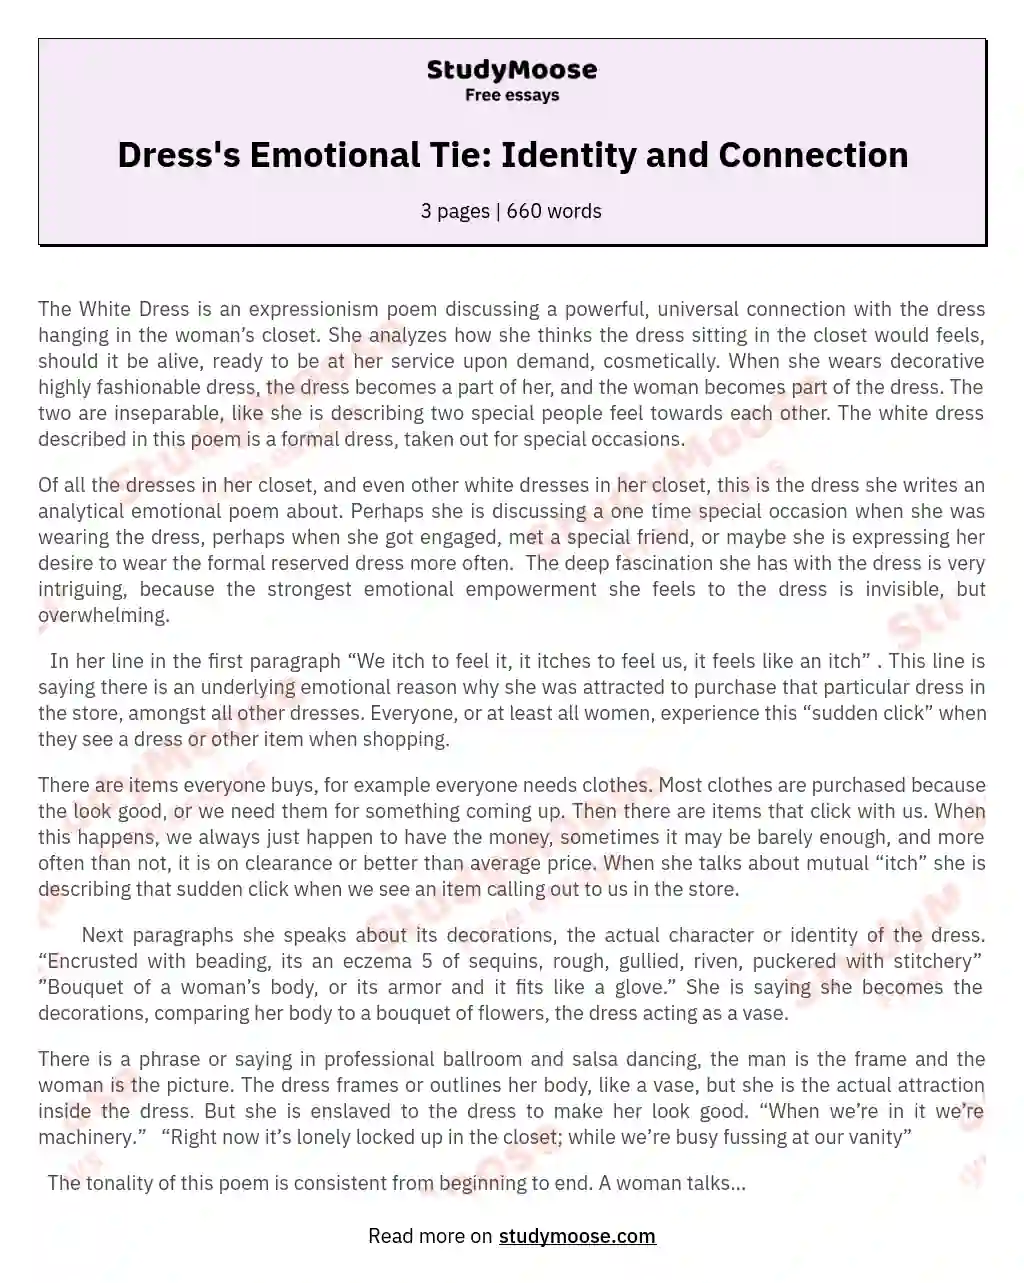 Dress's Emotional Tie: Identity and Connection essay